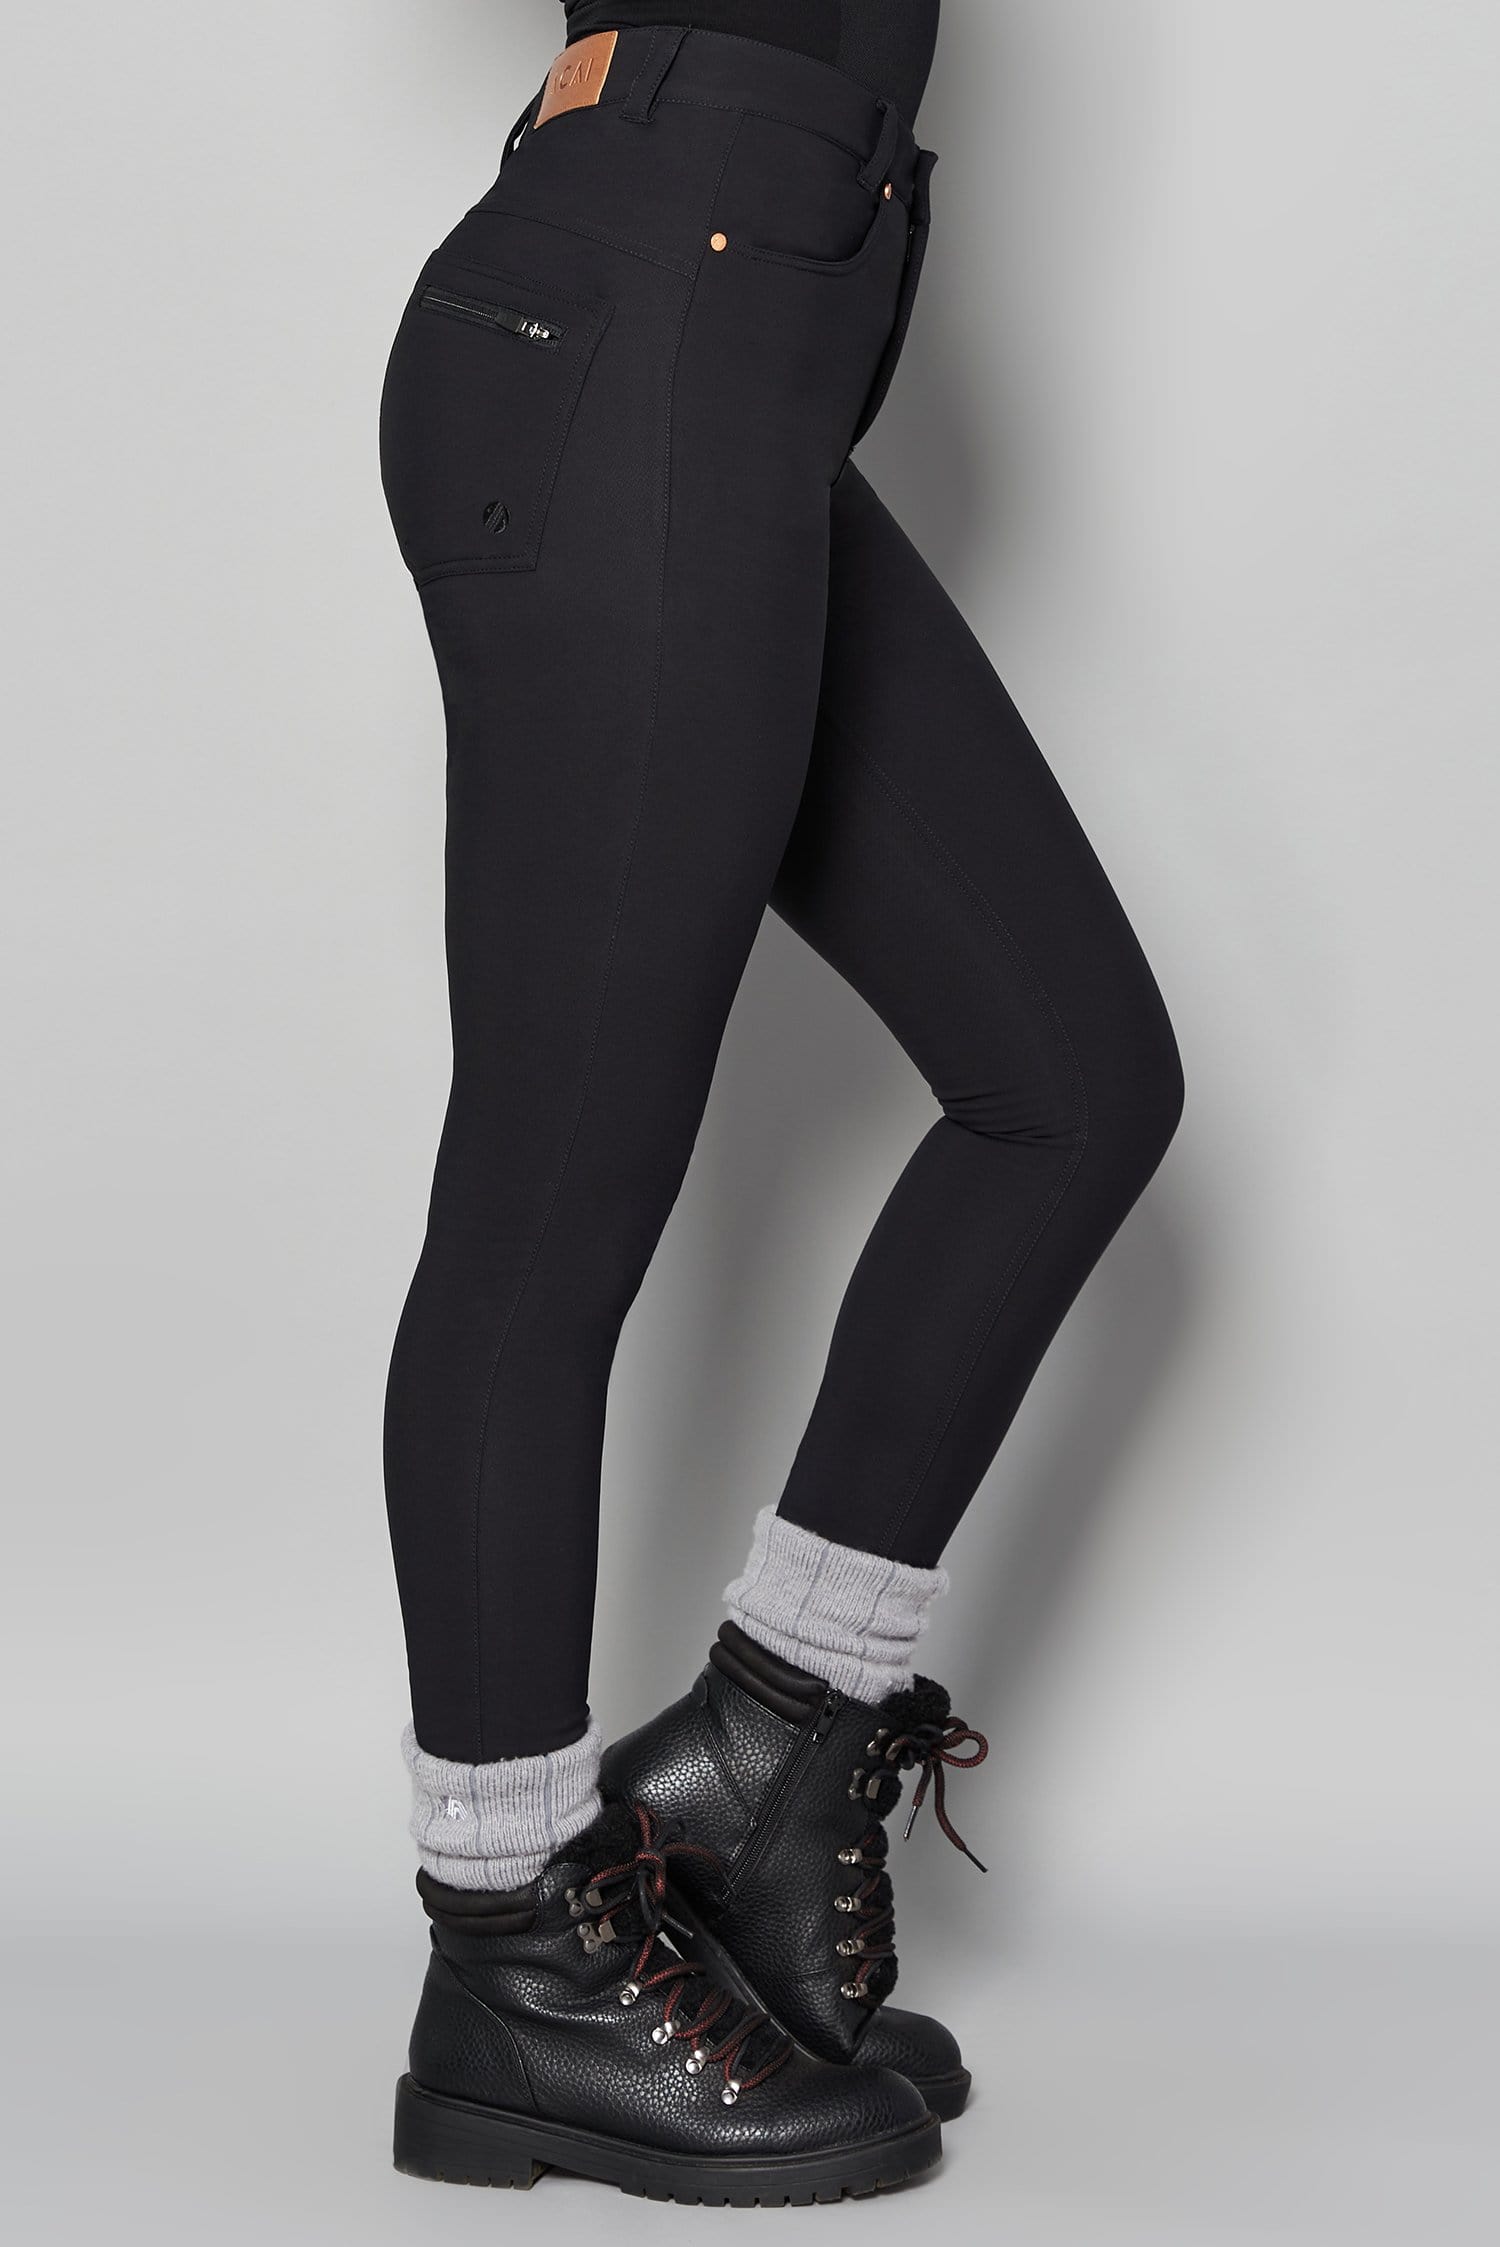 Thermal Skinny Outdoor Trousers - Black - 26r / Uk8 - Womens - Acai Outdoorwear